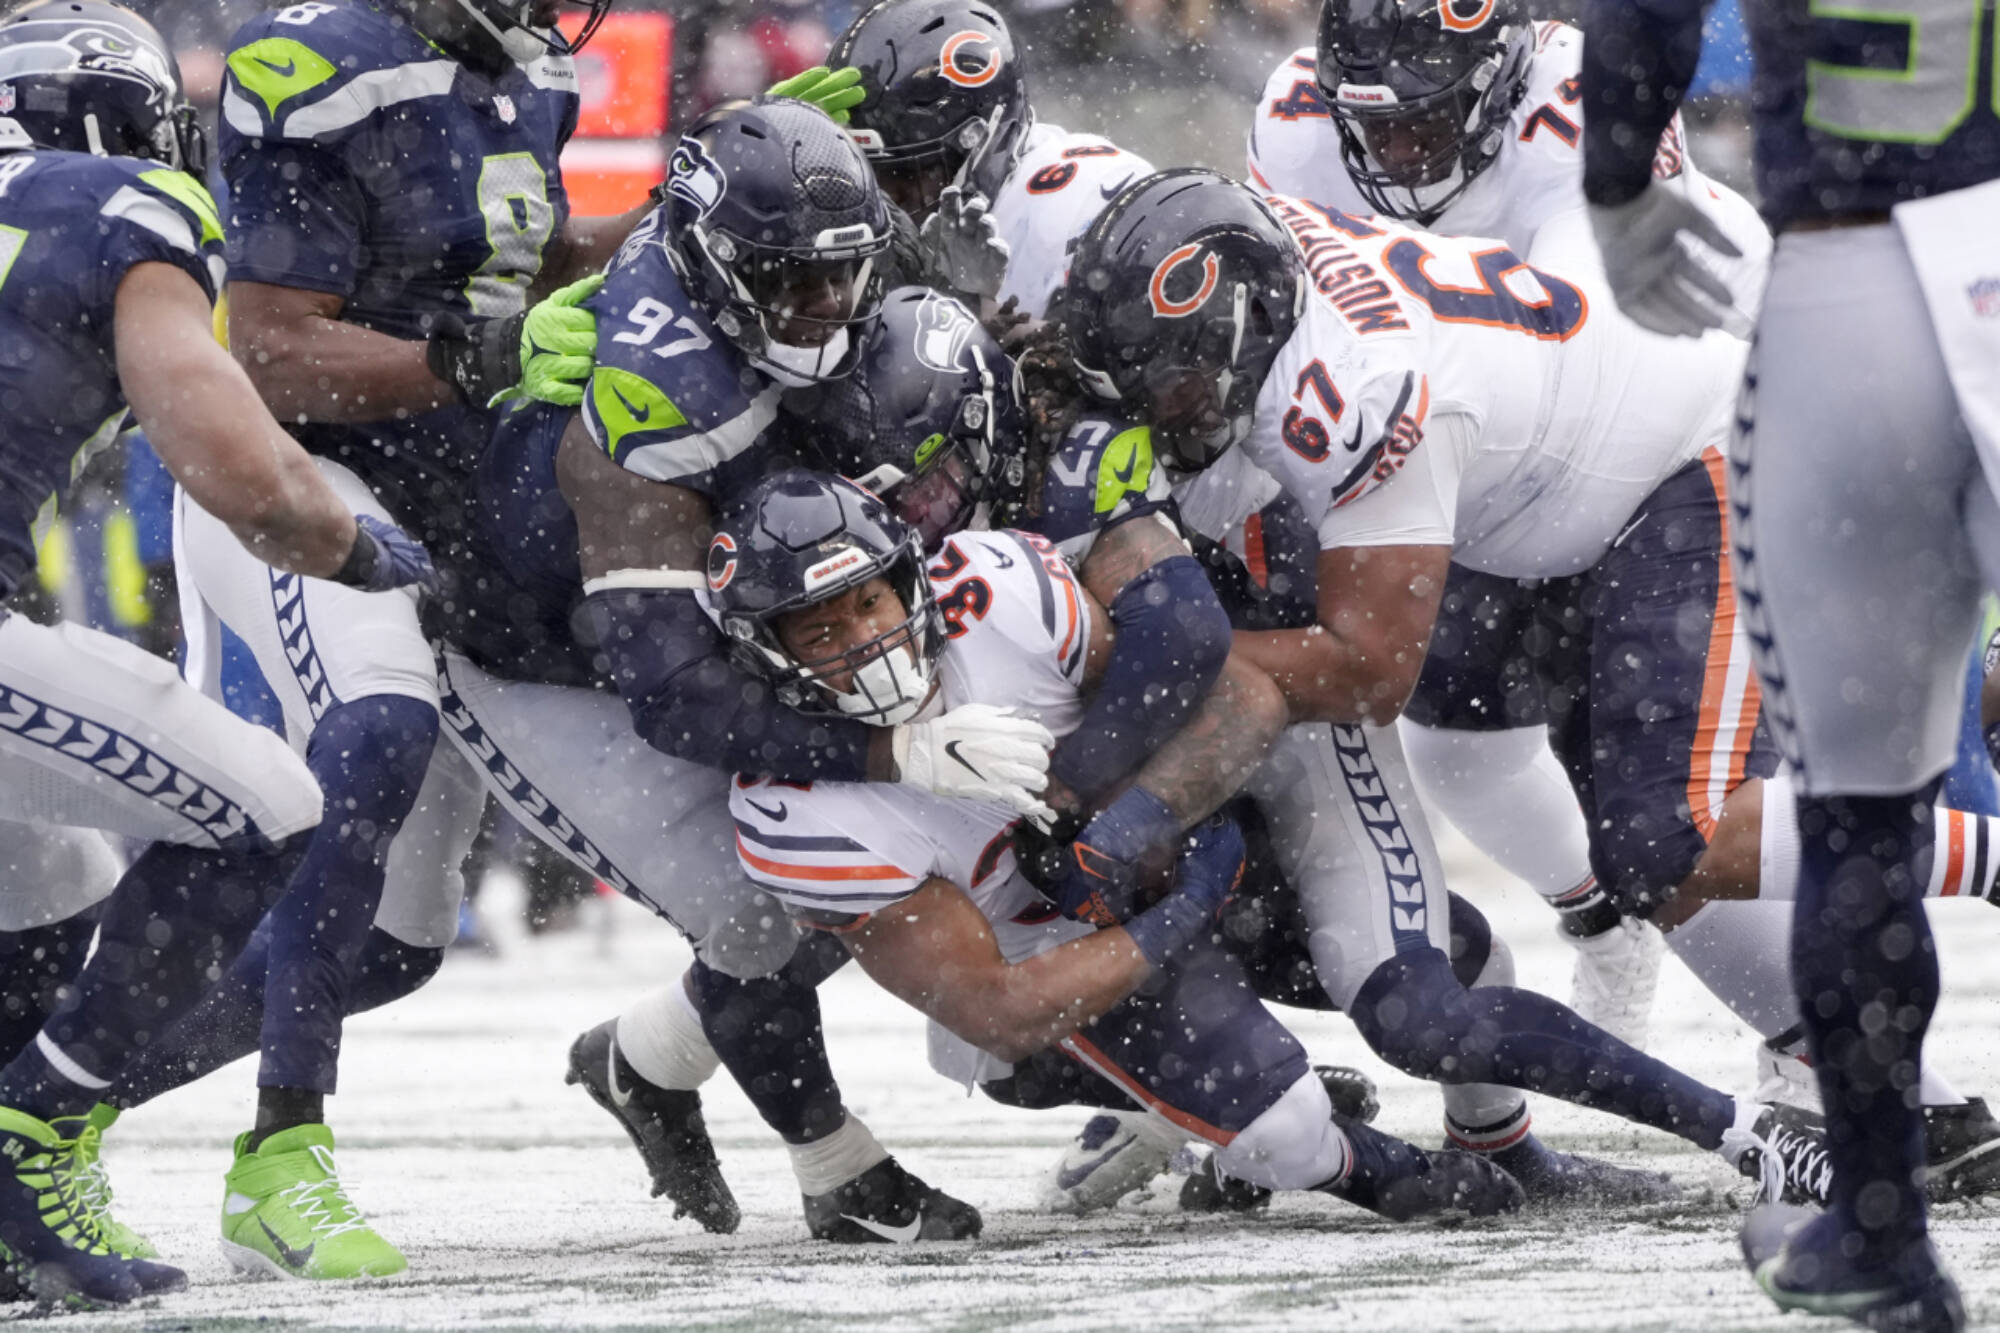 Stephen Brashear/The Associated Press
Chicago Bears running back David Montgomery, bottom, scores a touchdown on a carry against the Seattle Seahawks during the first half Sunday in snowy Seattle.